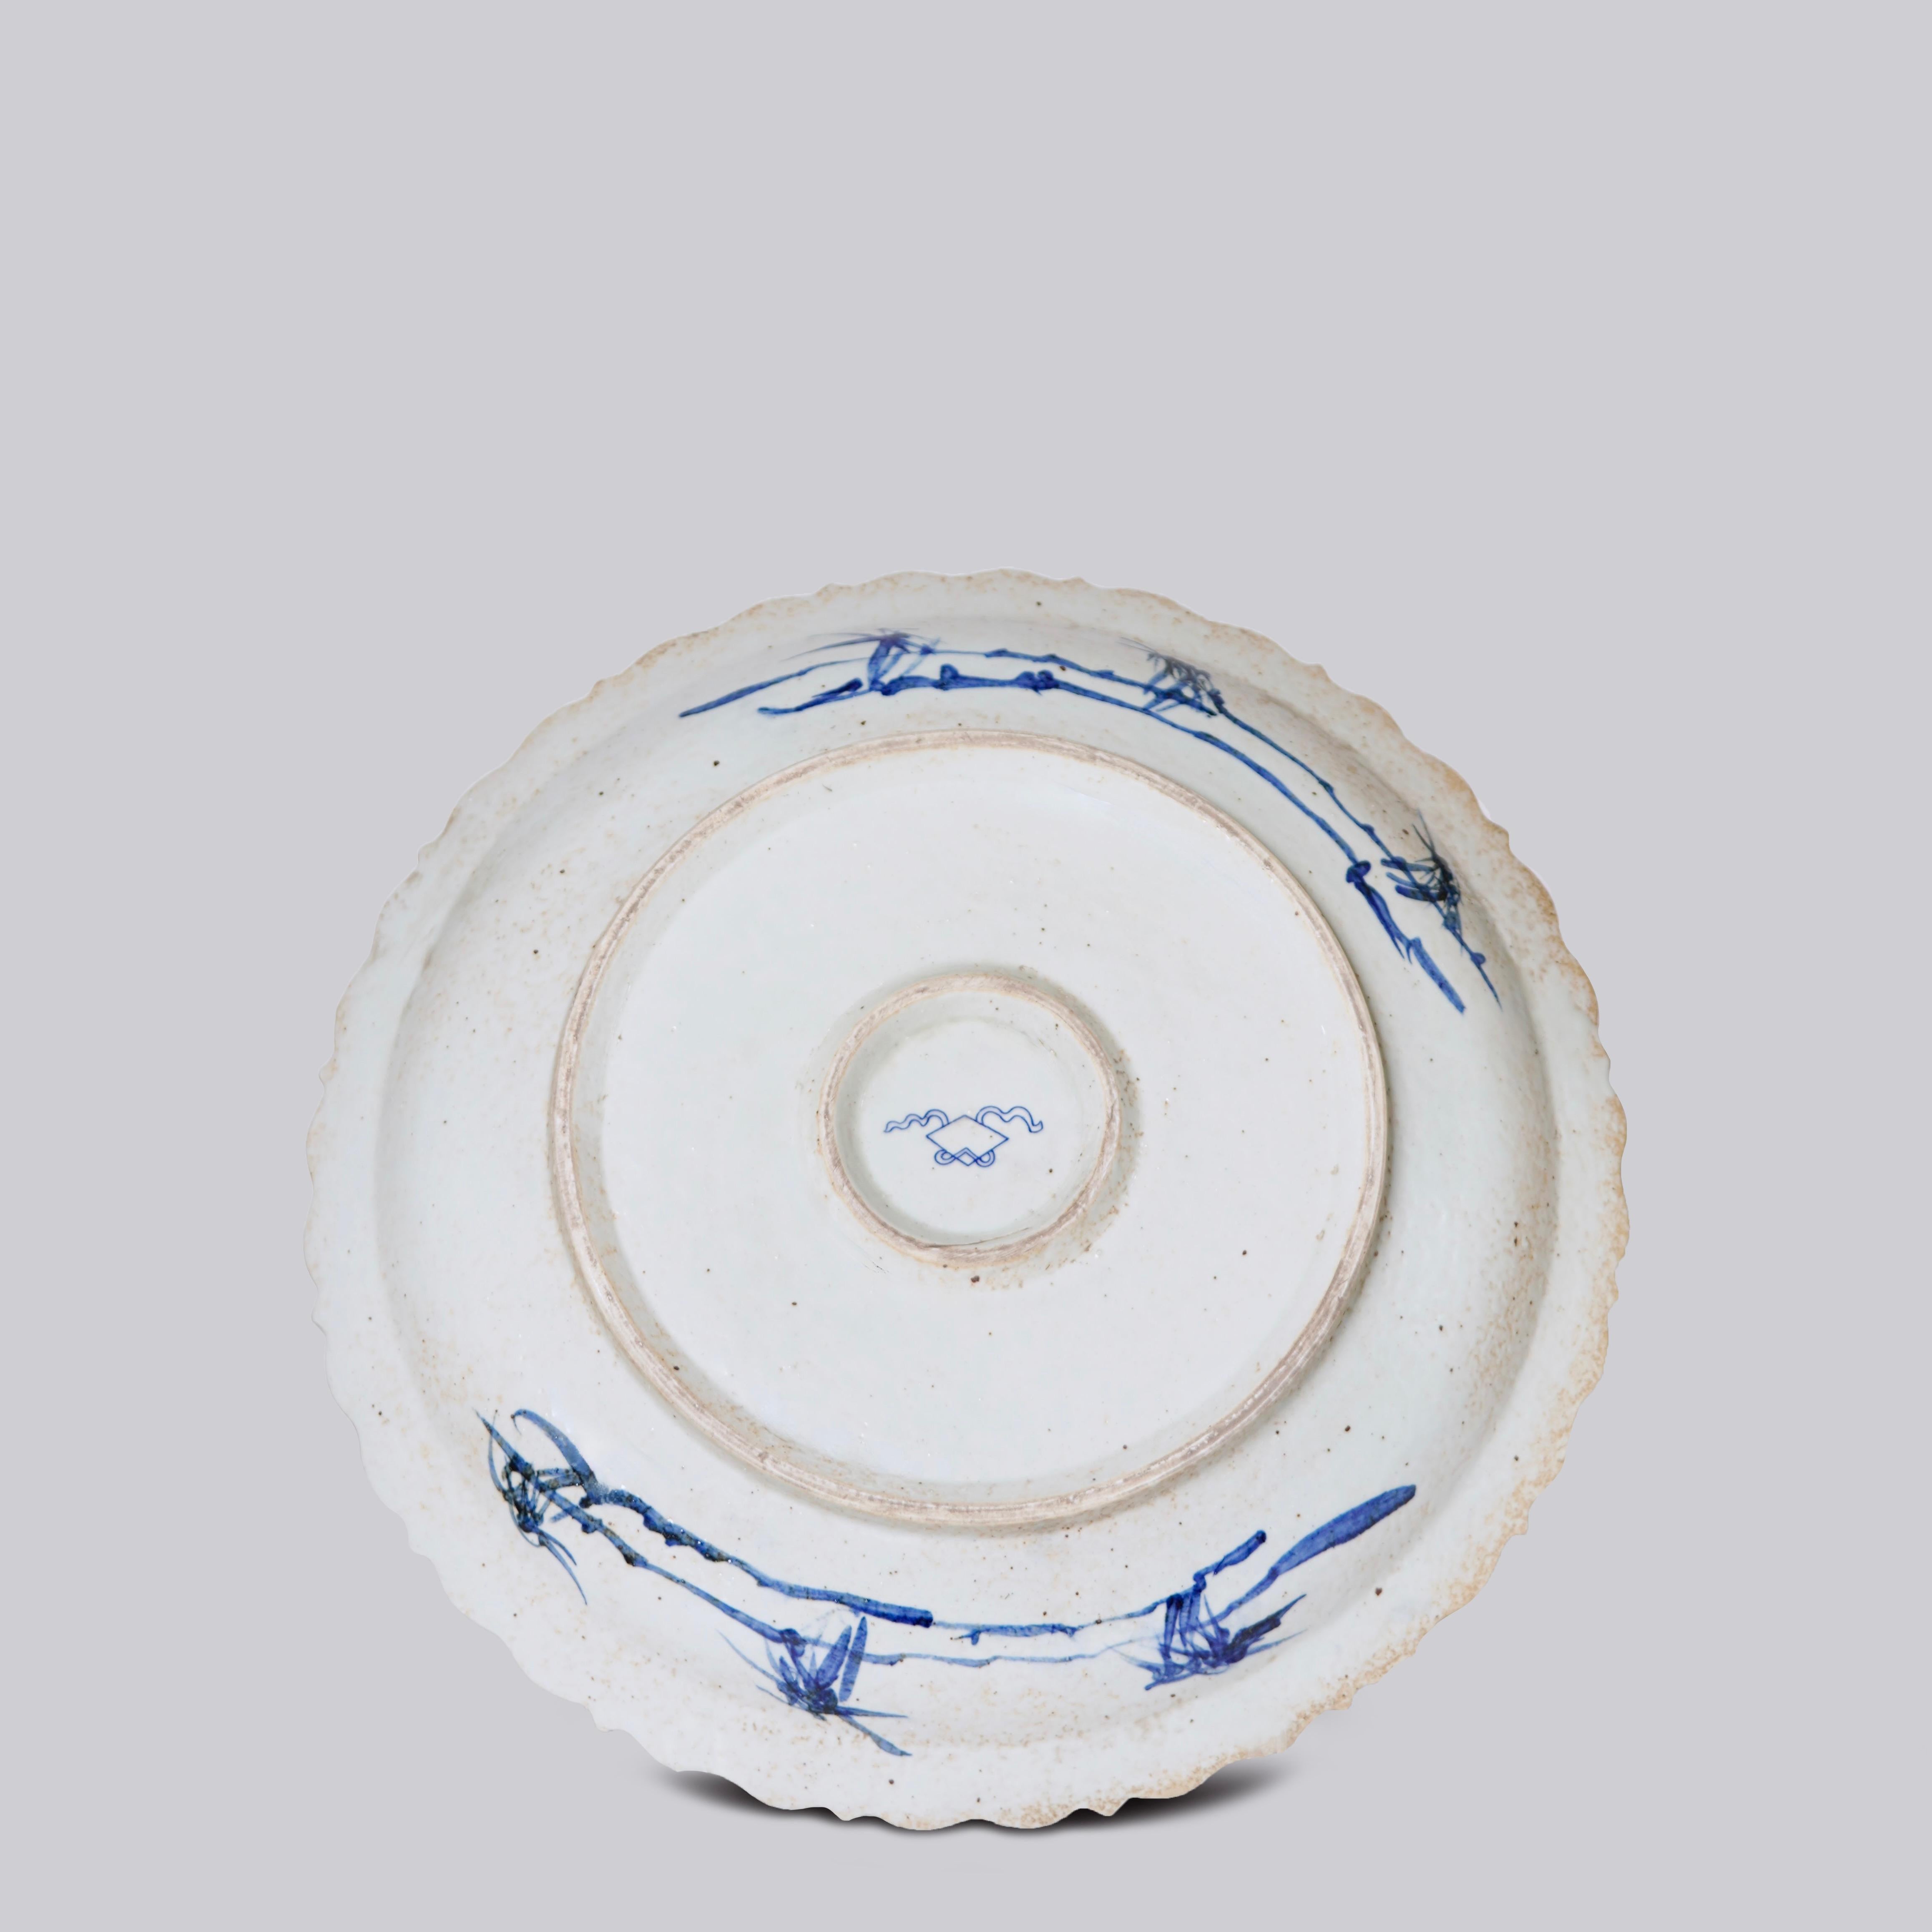 Chinese Blue and White Porcelain Platter with Bird and Flower Design and Foliated Rim